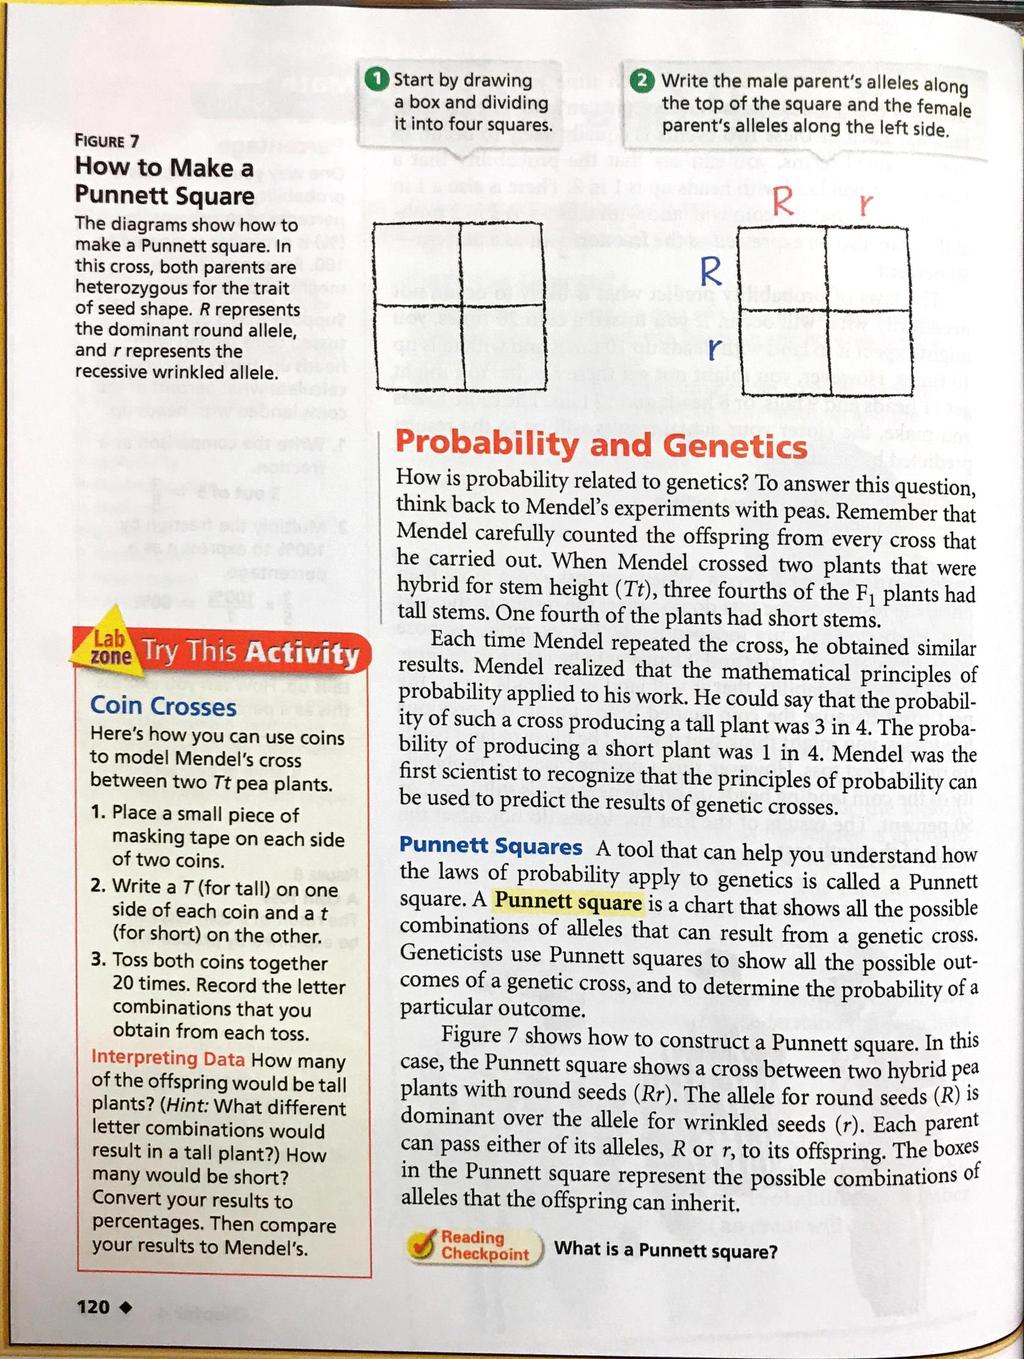 FIGURE 7 How to Make a Punnett Square The diagrams show how to make a Punnett square. In this cross, both parents are heterozygous for the trait of seed shape.